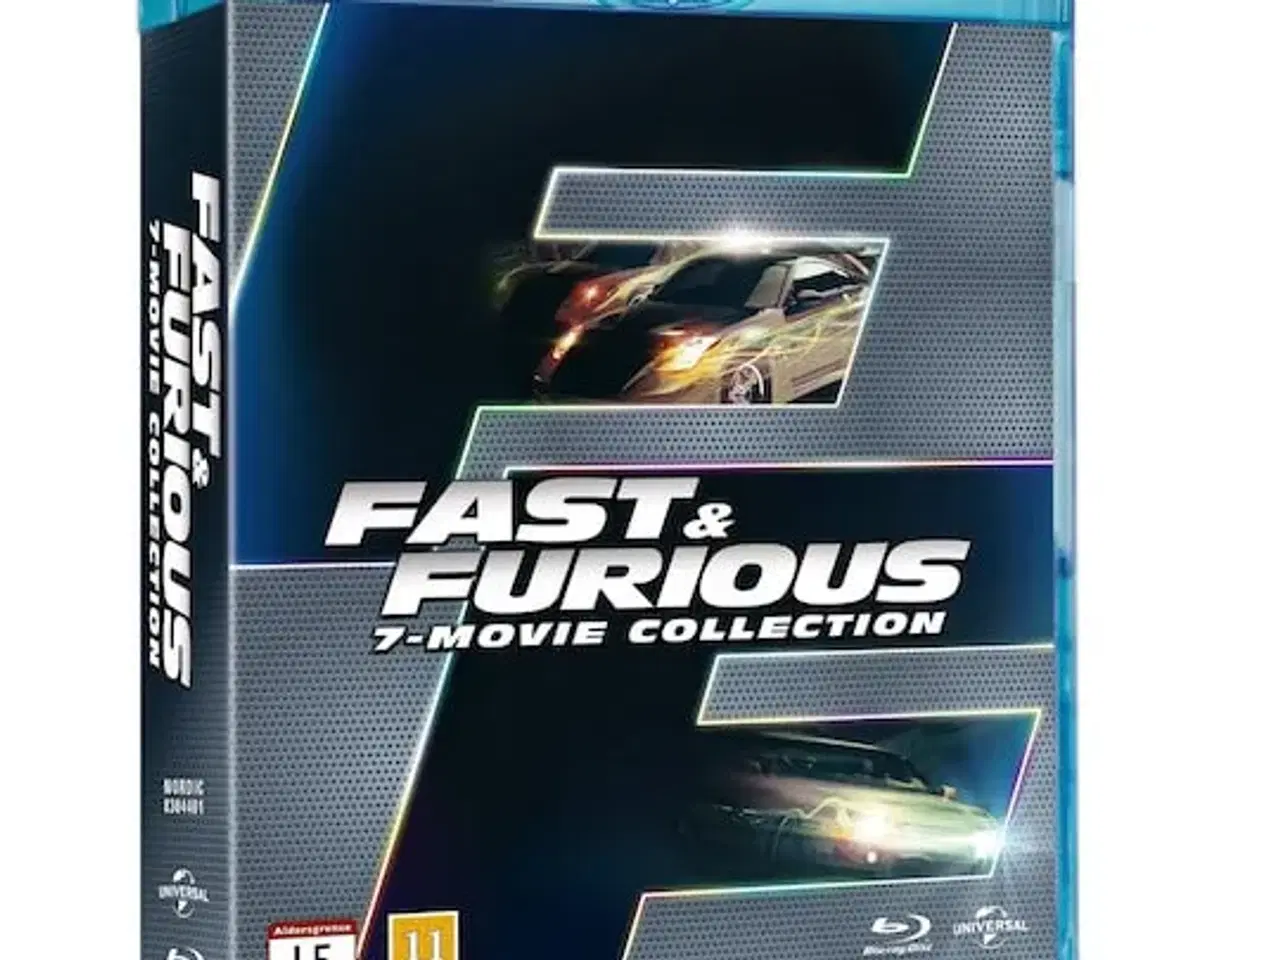 Billede 1 - fast and furious 7 movie collection blu ray